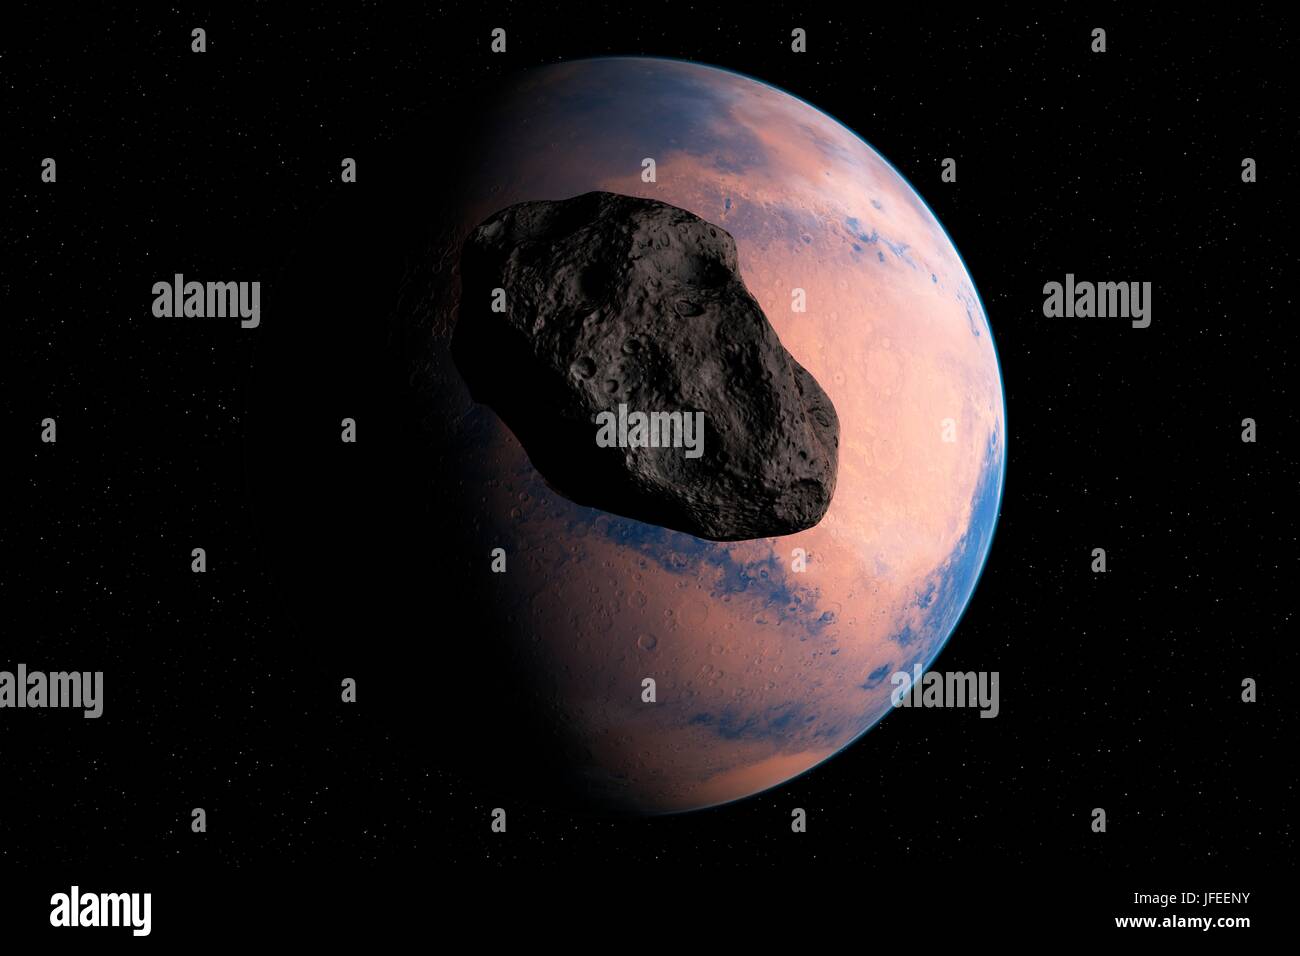 Planet and asteroid in space, illustration. Stock Photo